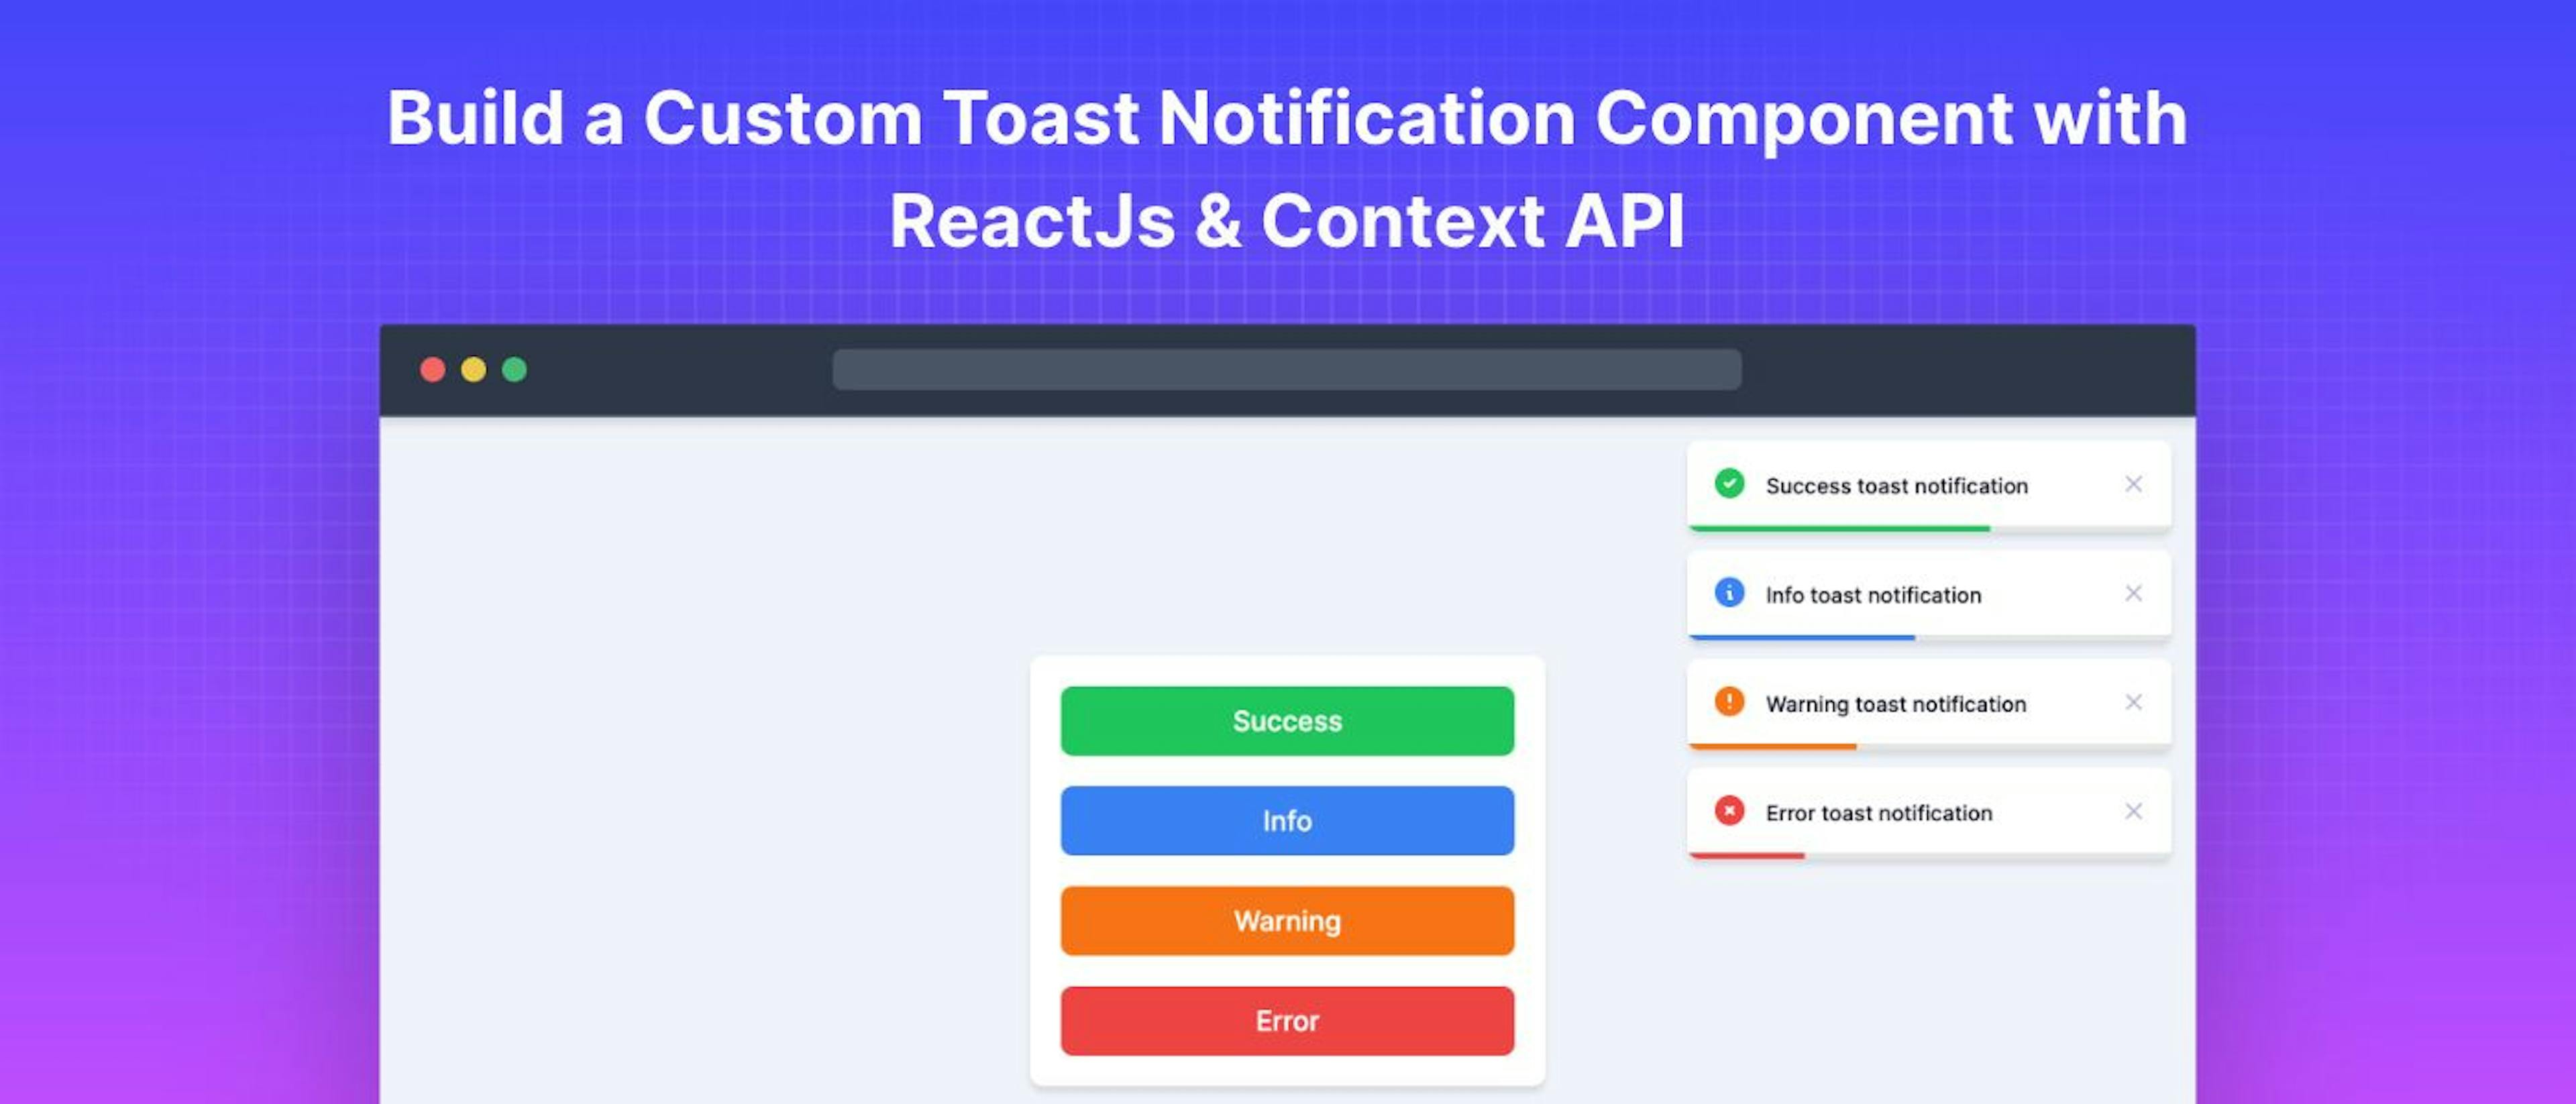 /using-reactjs-and-context-api-to-build-a-custom-toast-notification-component feature image